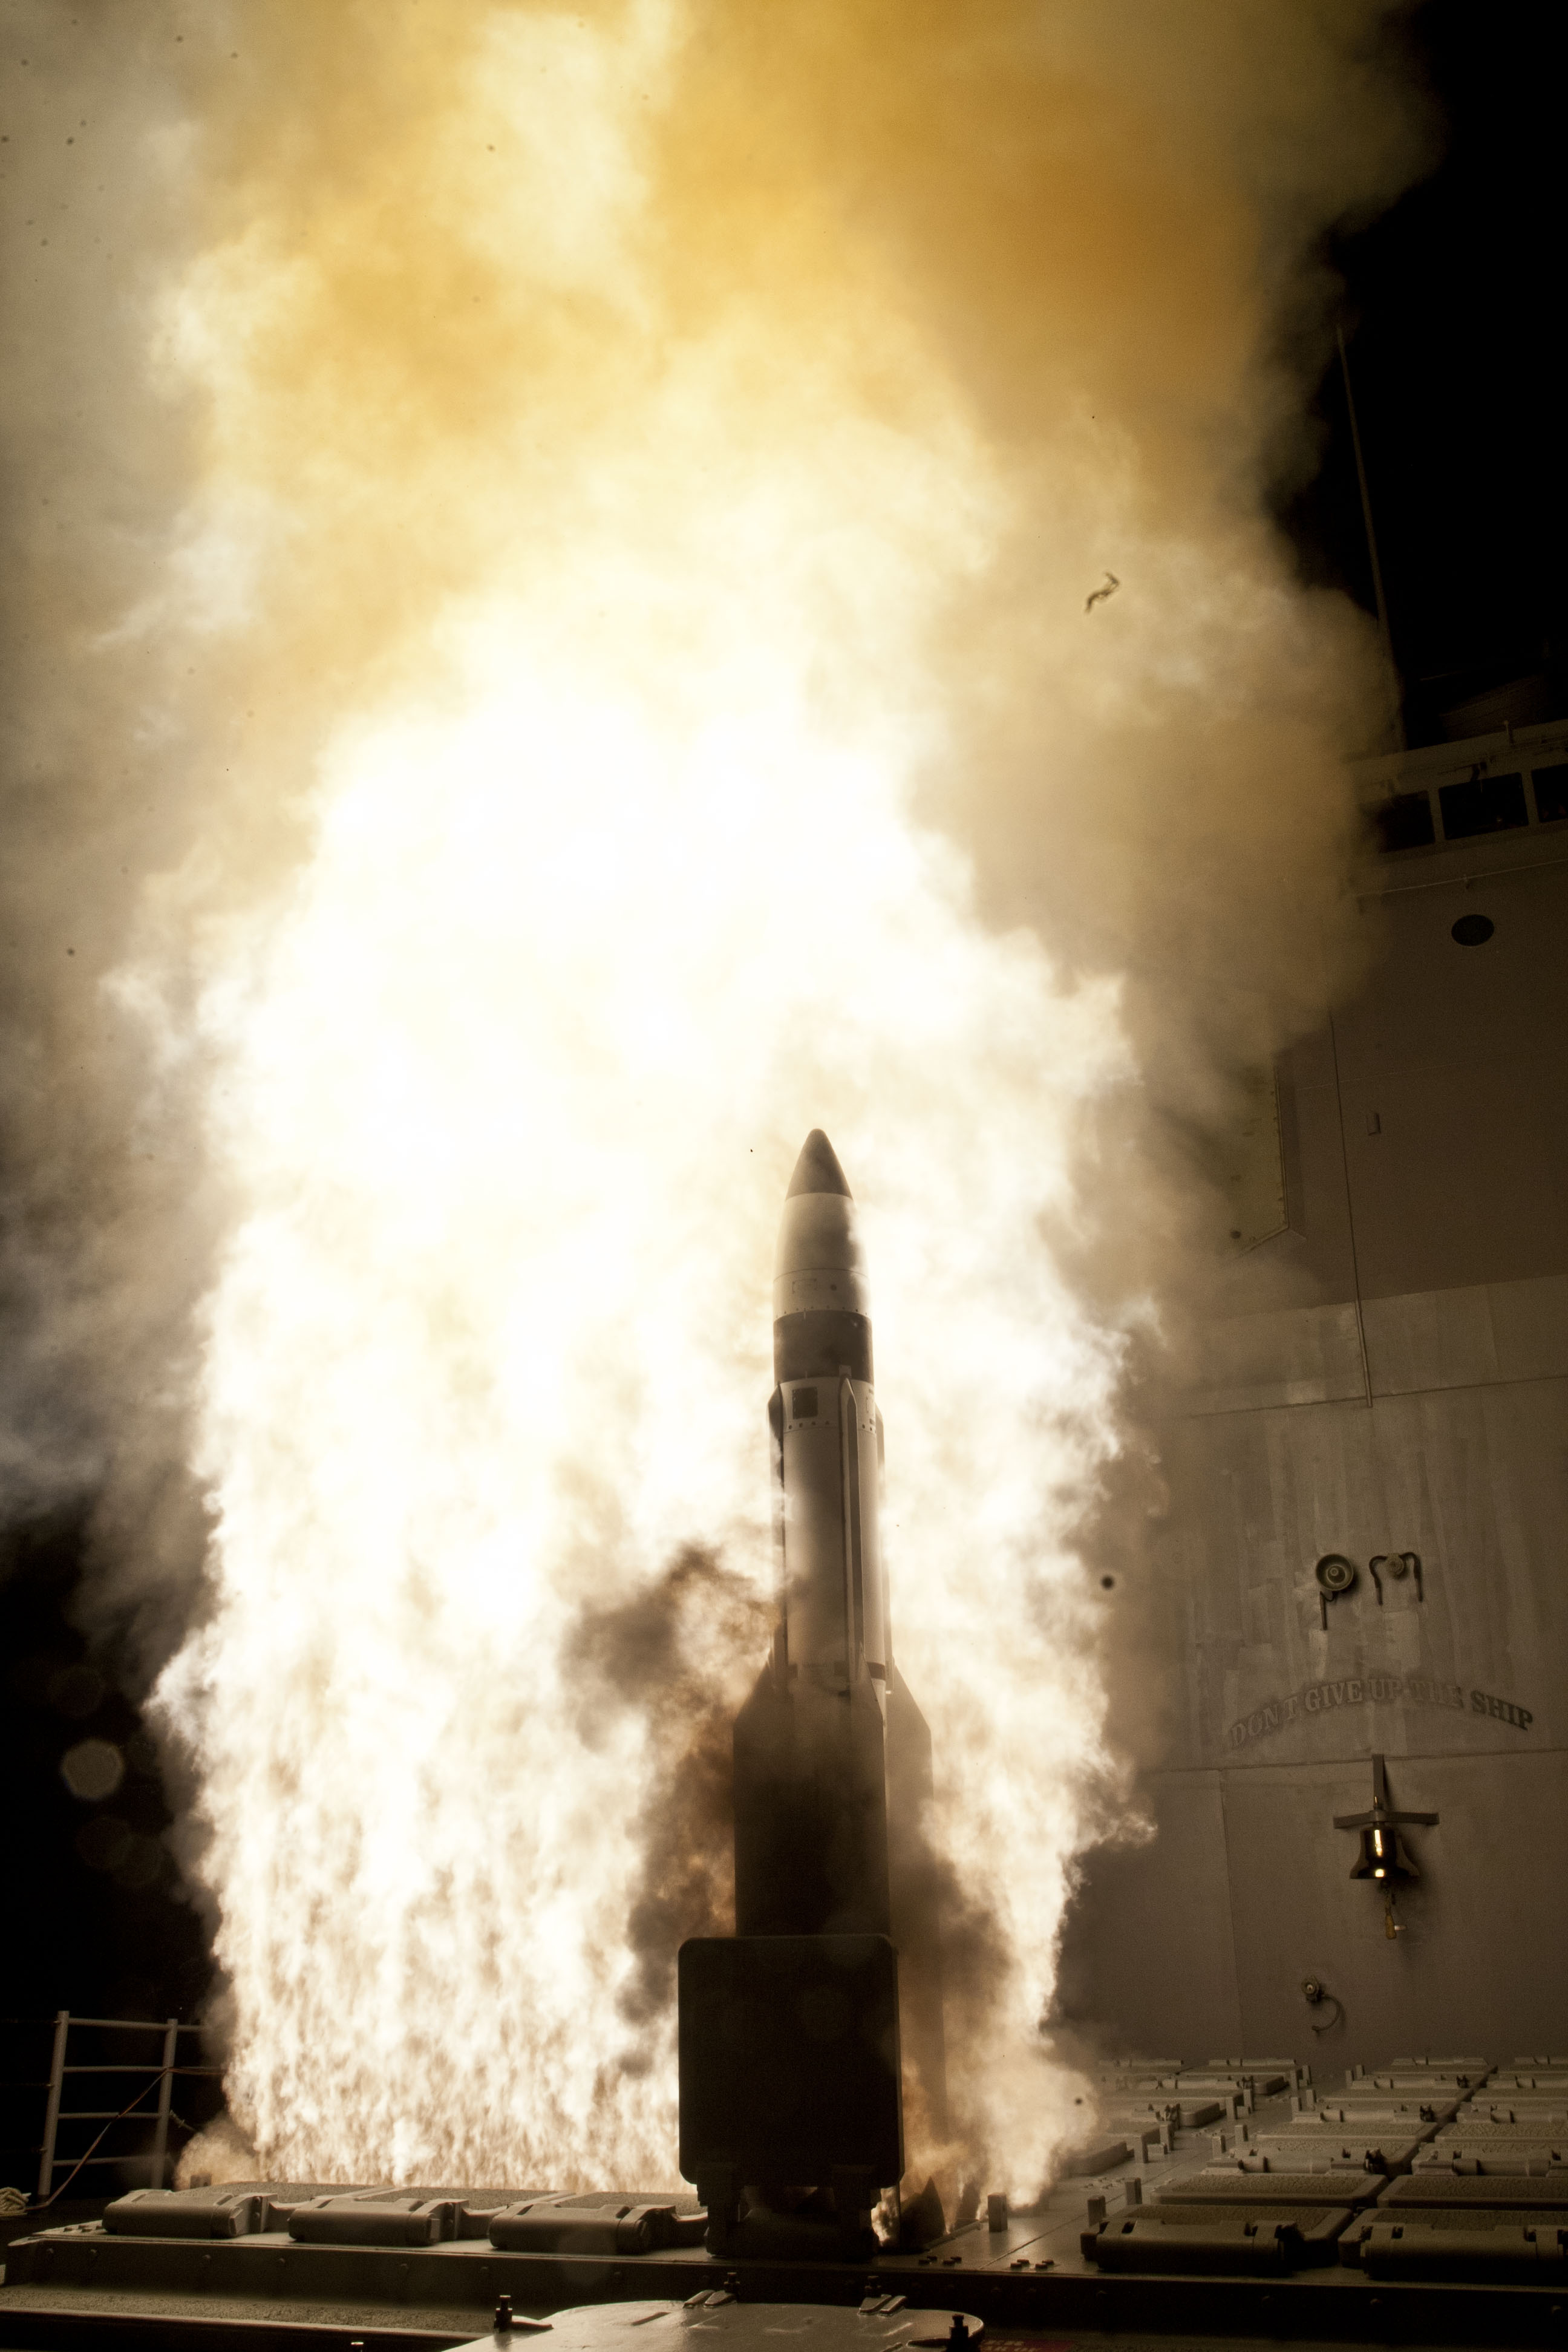 Standard Missile-3 (SM-3) Block 1B interceptor is launched from the USS Lake Erie